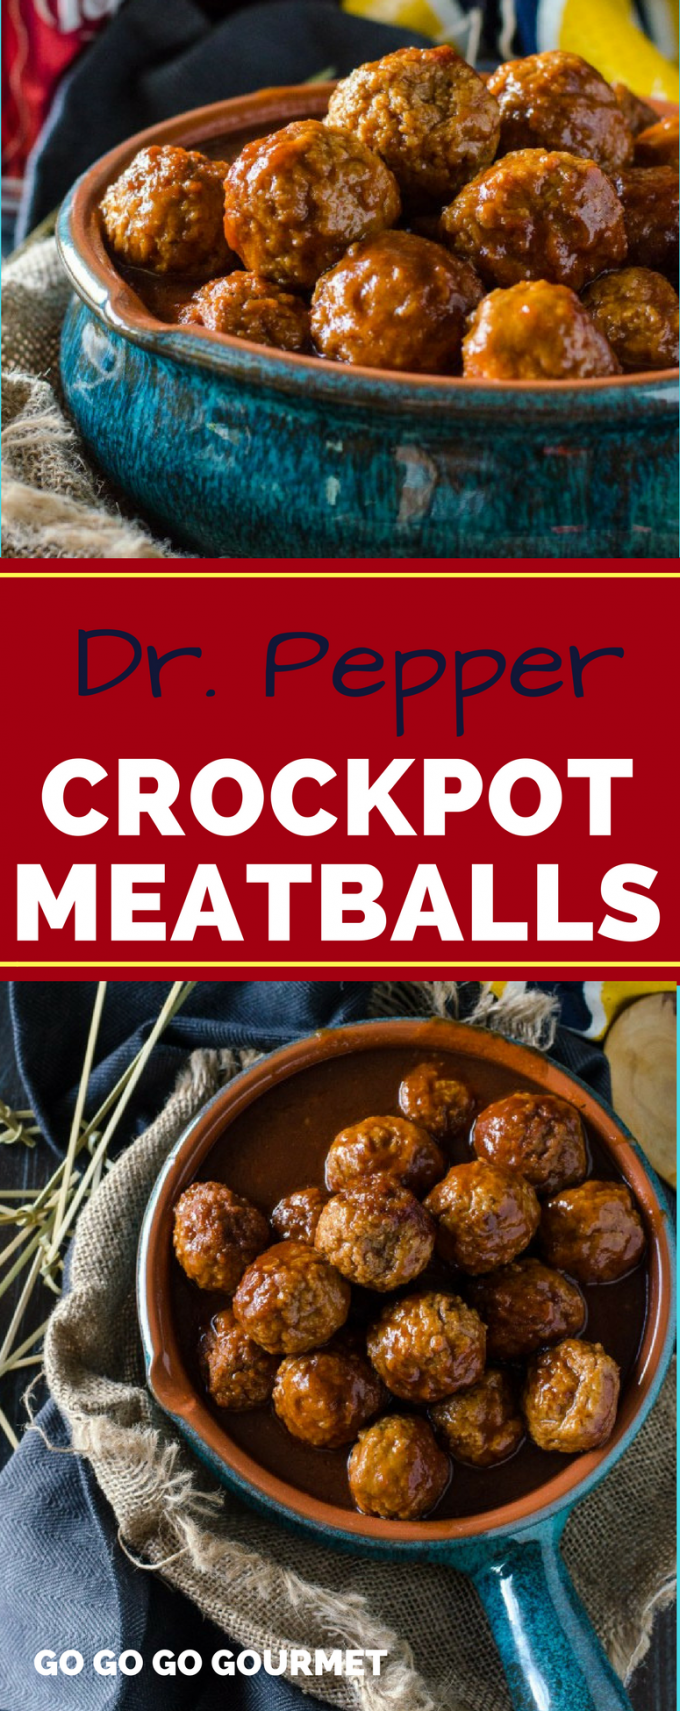 This is the best Dr Pepper Crockpot Meatballs recipe! You can either use pre-made meatballs to make it easy, or make them homemade with ground beef. Either way, you get a tasty slow cooker appetizer that is perfect for all of your summer BBQs! #summerbbqdishes #easycrockpotmeals #drpeppercrockpotmeatballs #gogogogourmet via @gogogogourmet